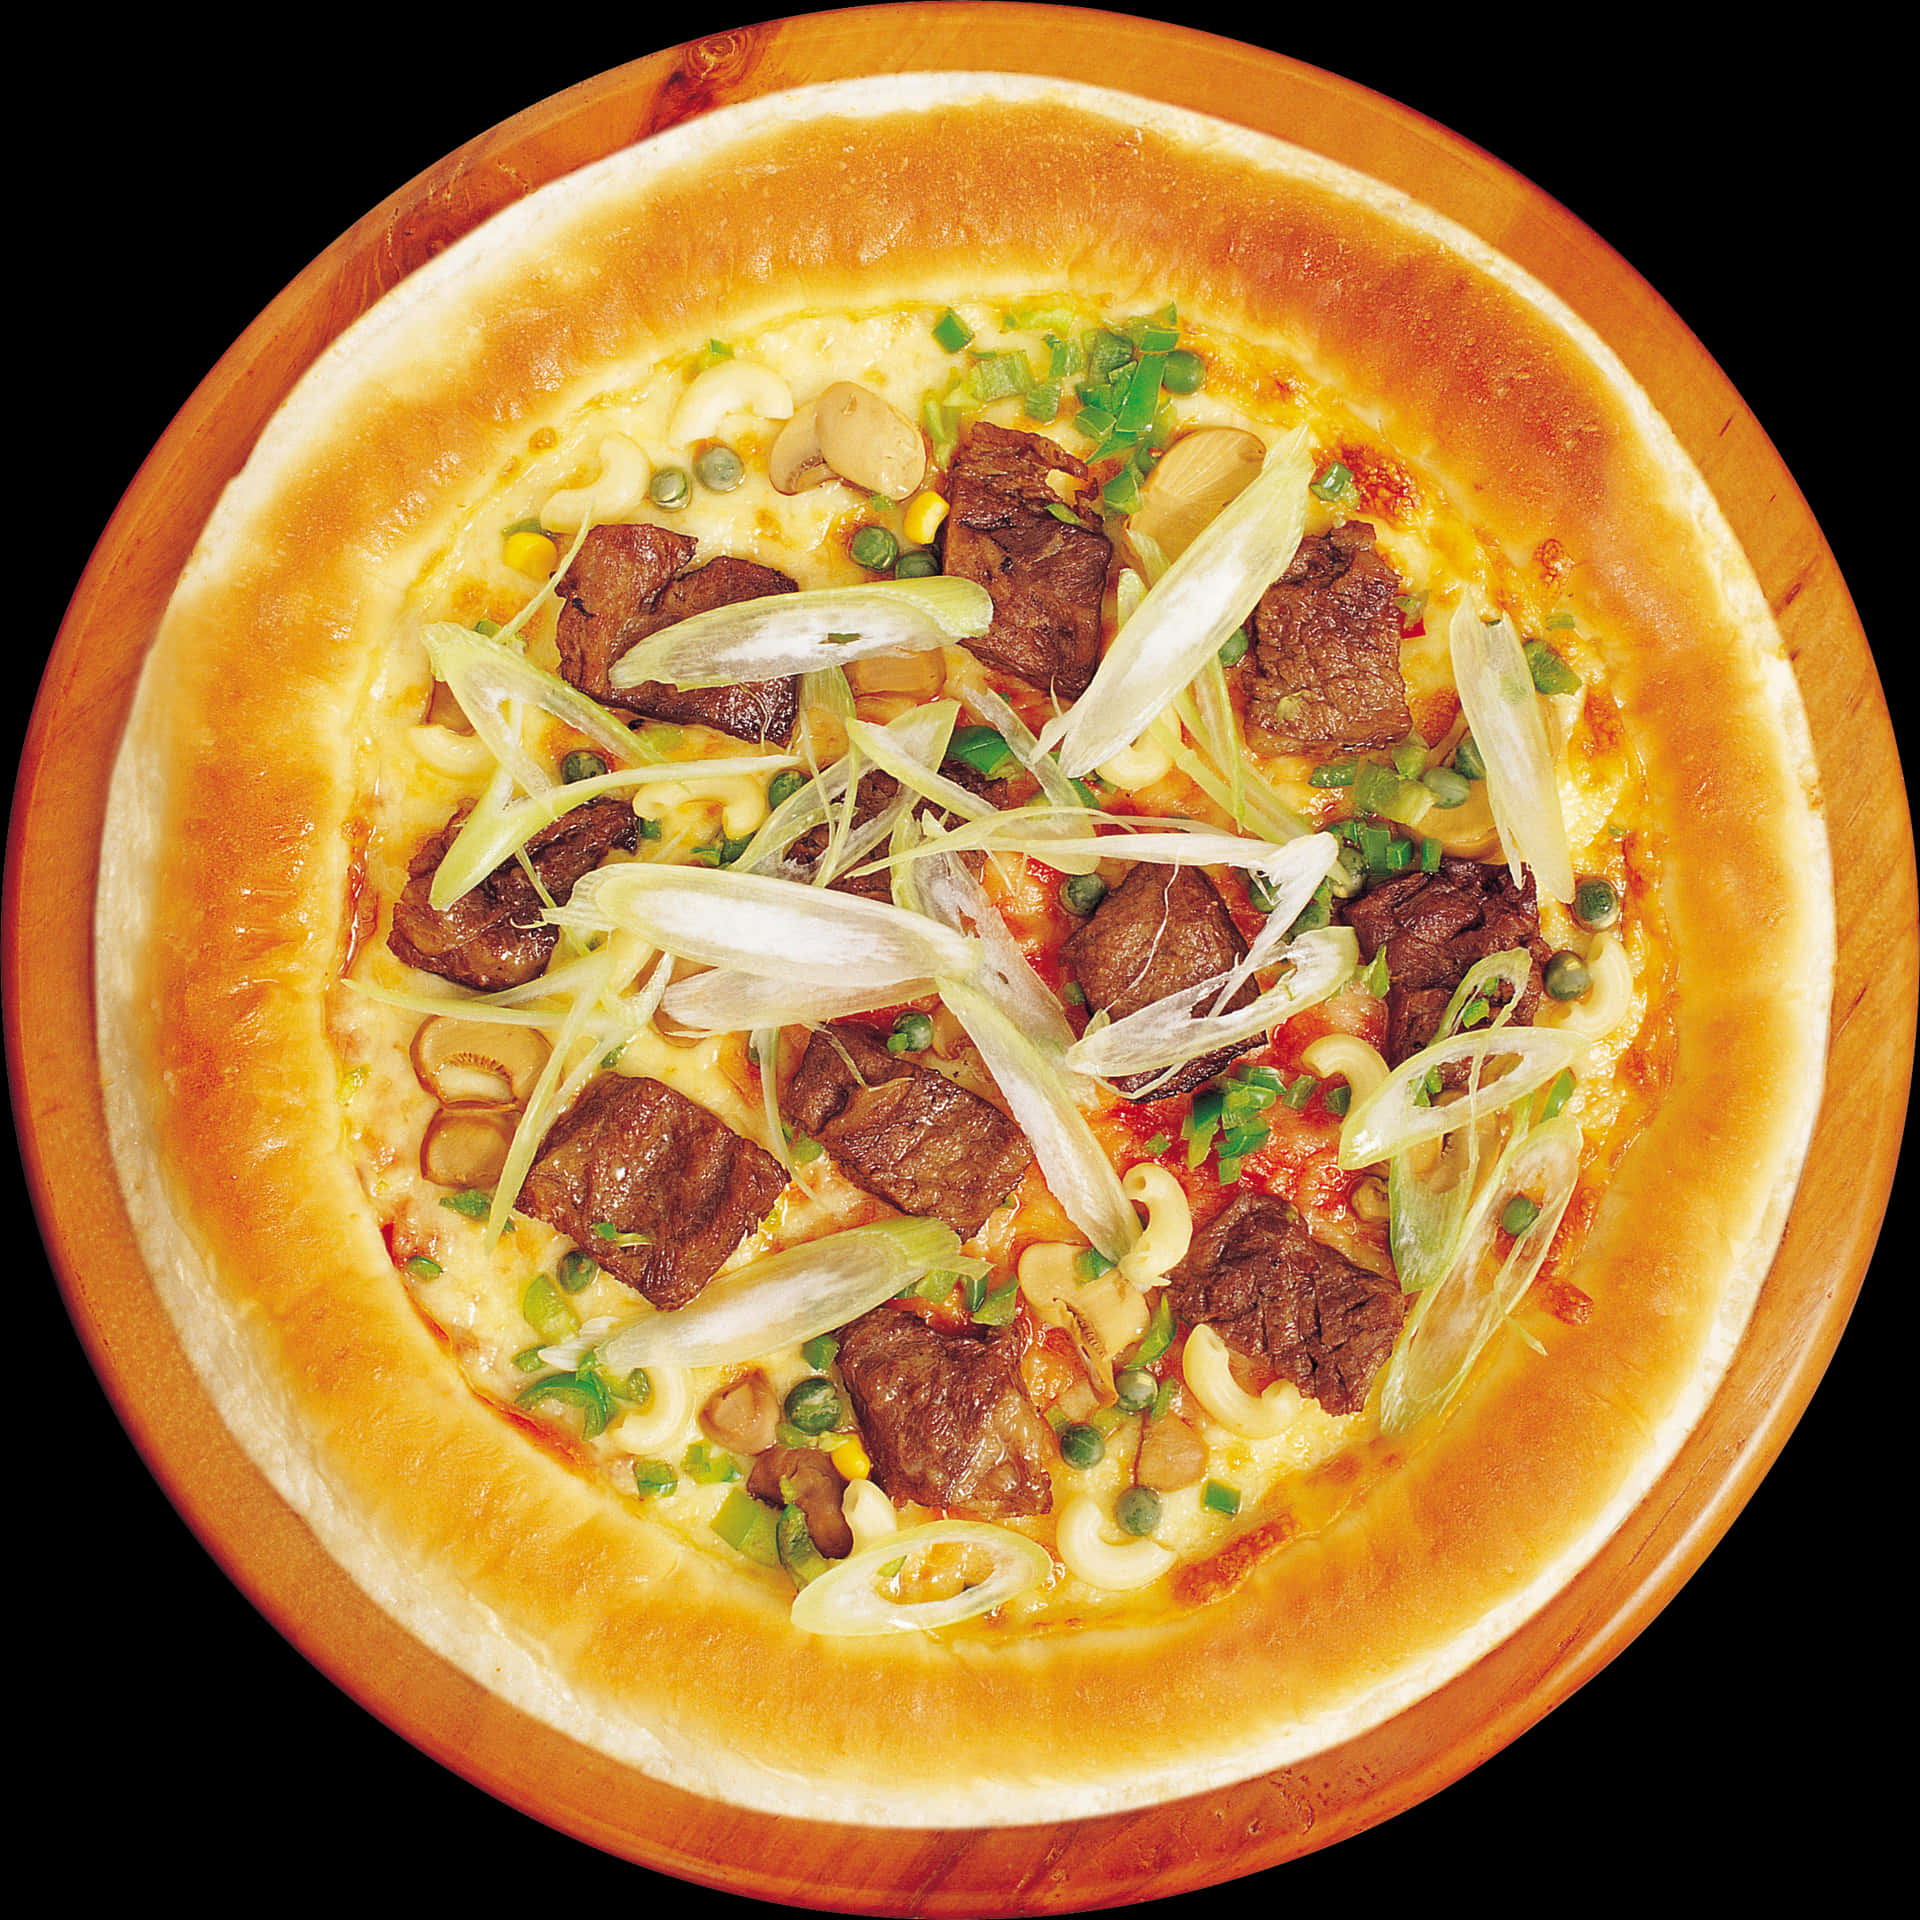 Beefand Onion Pizza Delicious Topping.jpg PNG